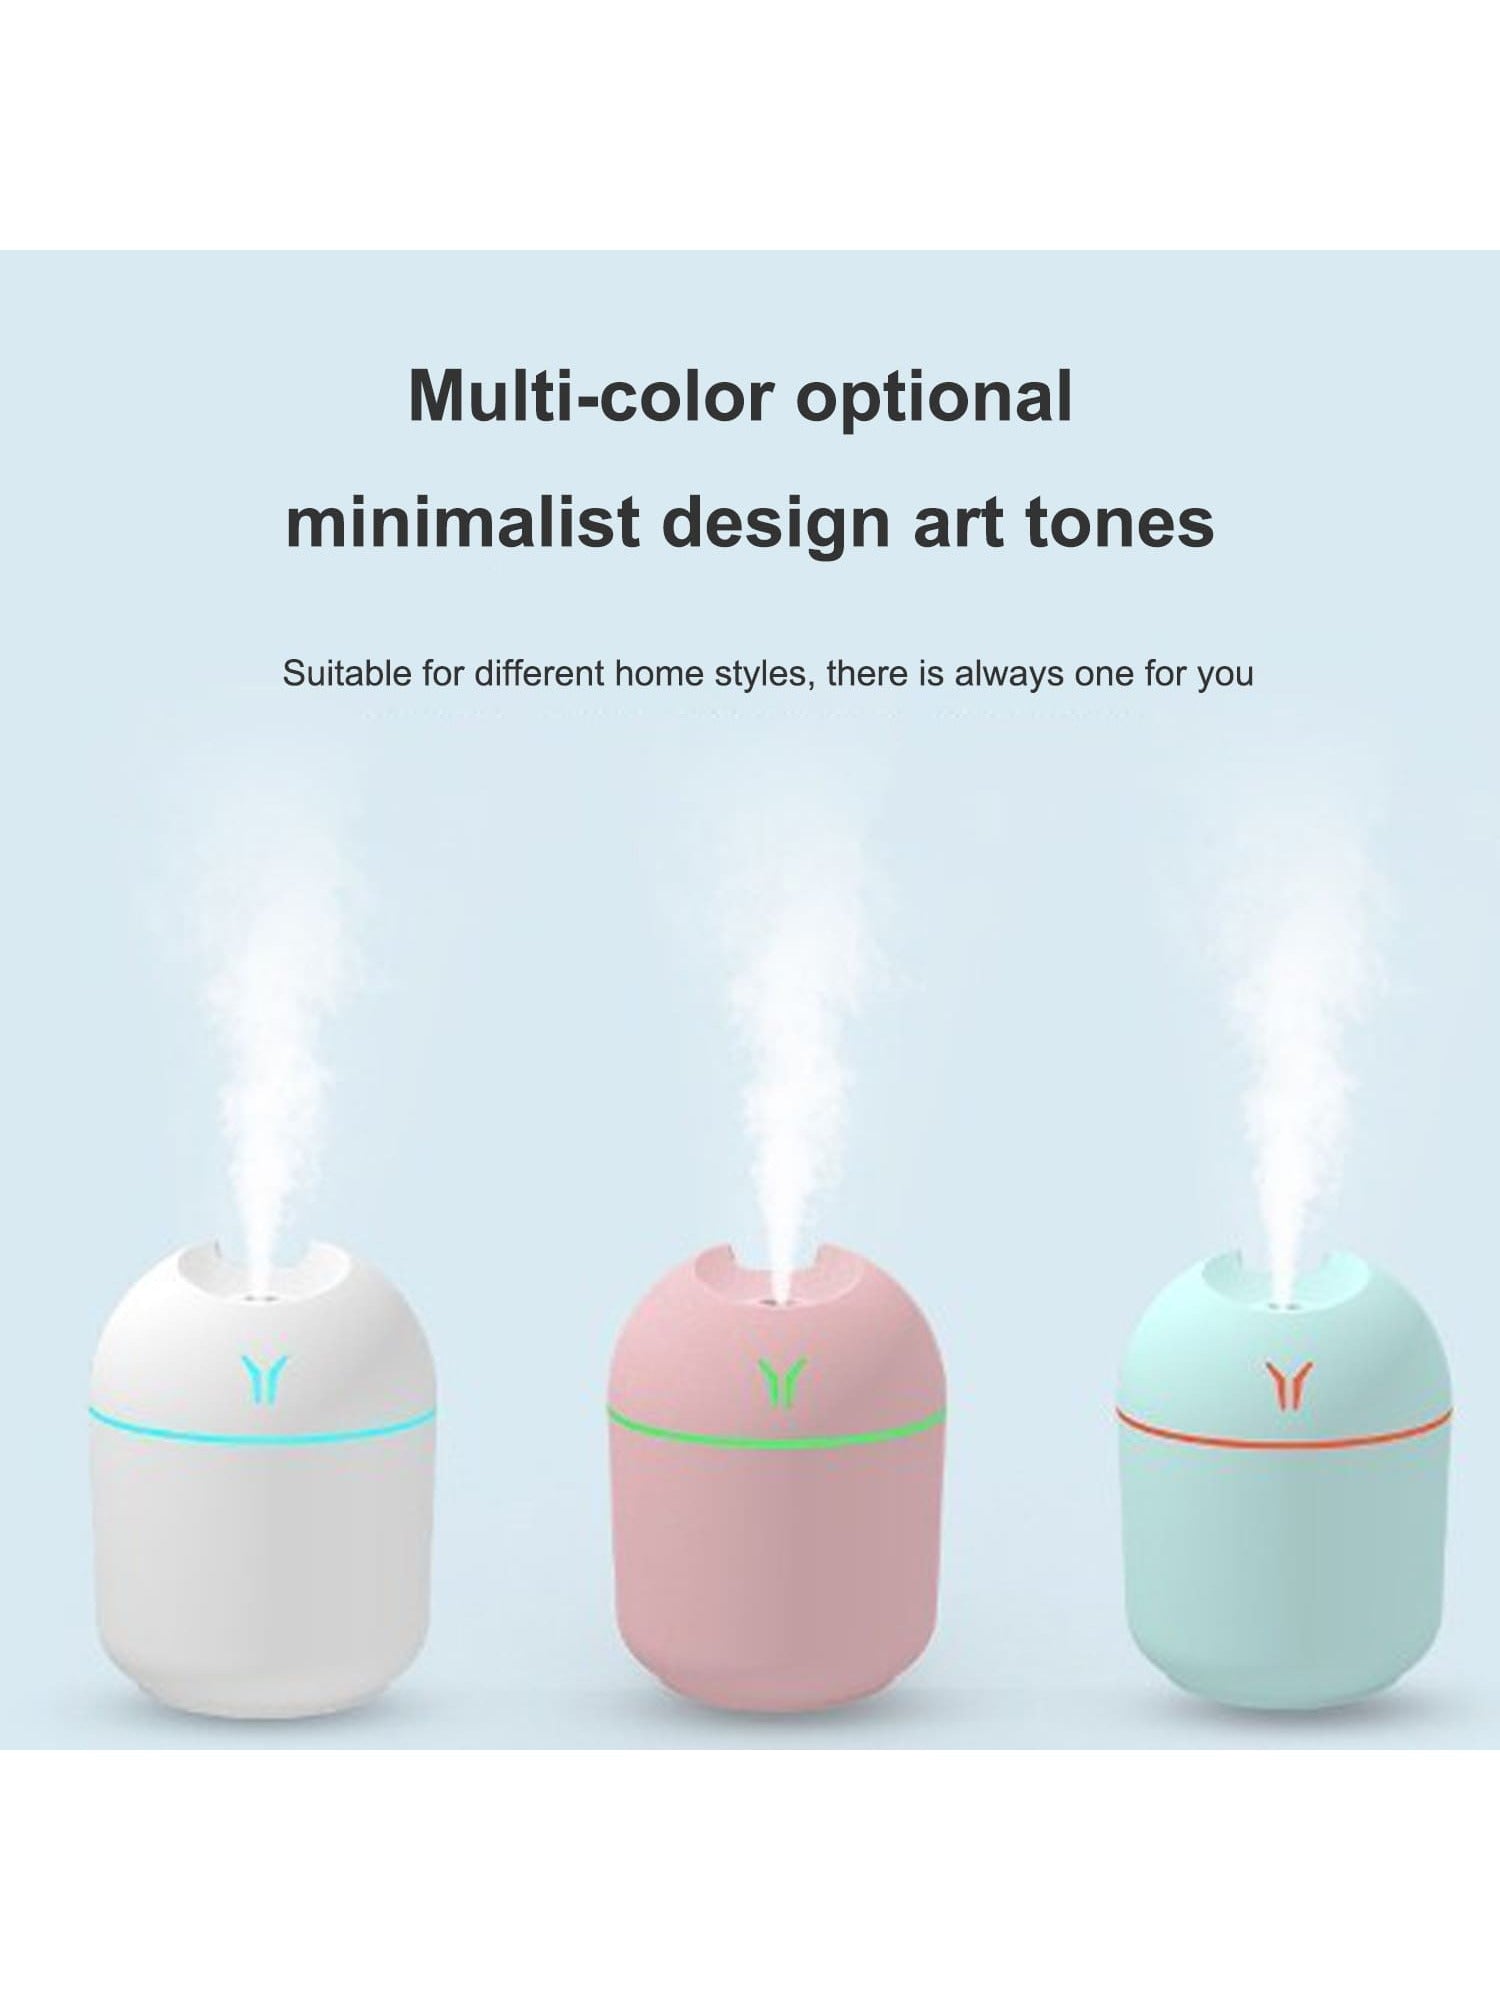 250ml Mini Egg Drop Humidifier Car Fog Home Desktop Air Mute Small Humidifier(The humidifier works only when plugged in)-White-3